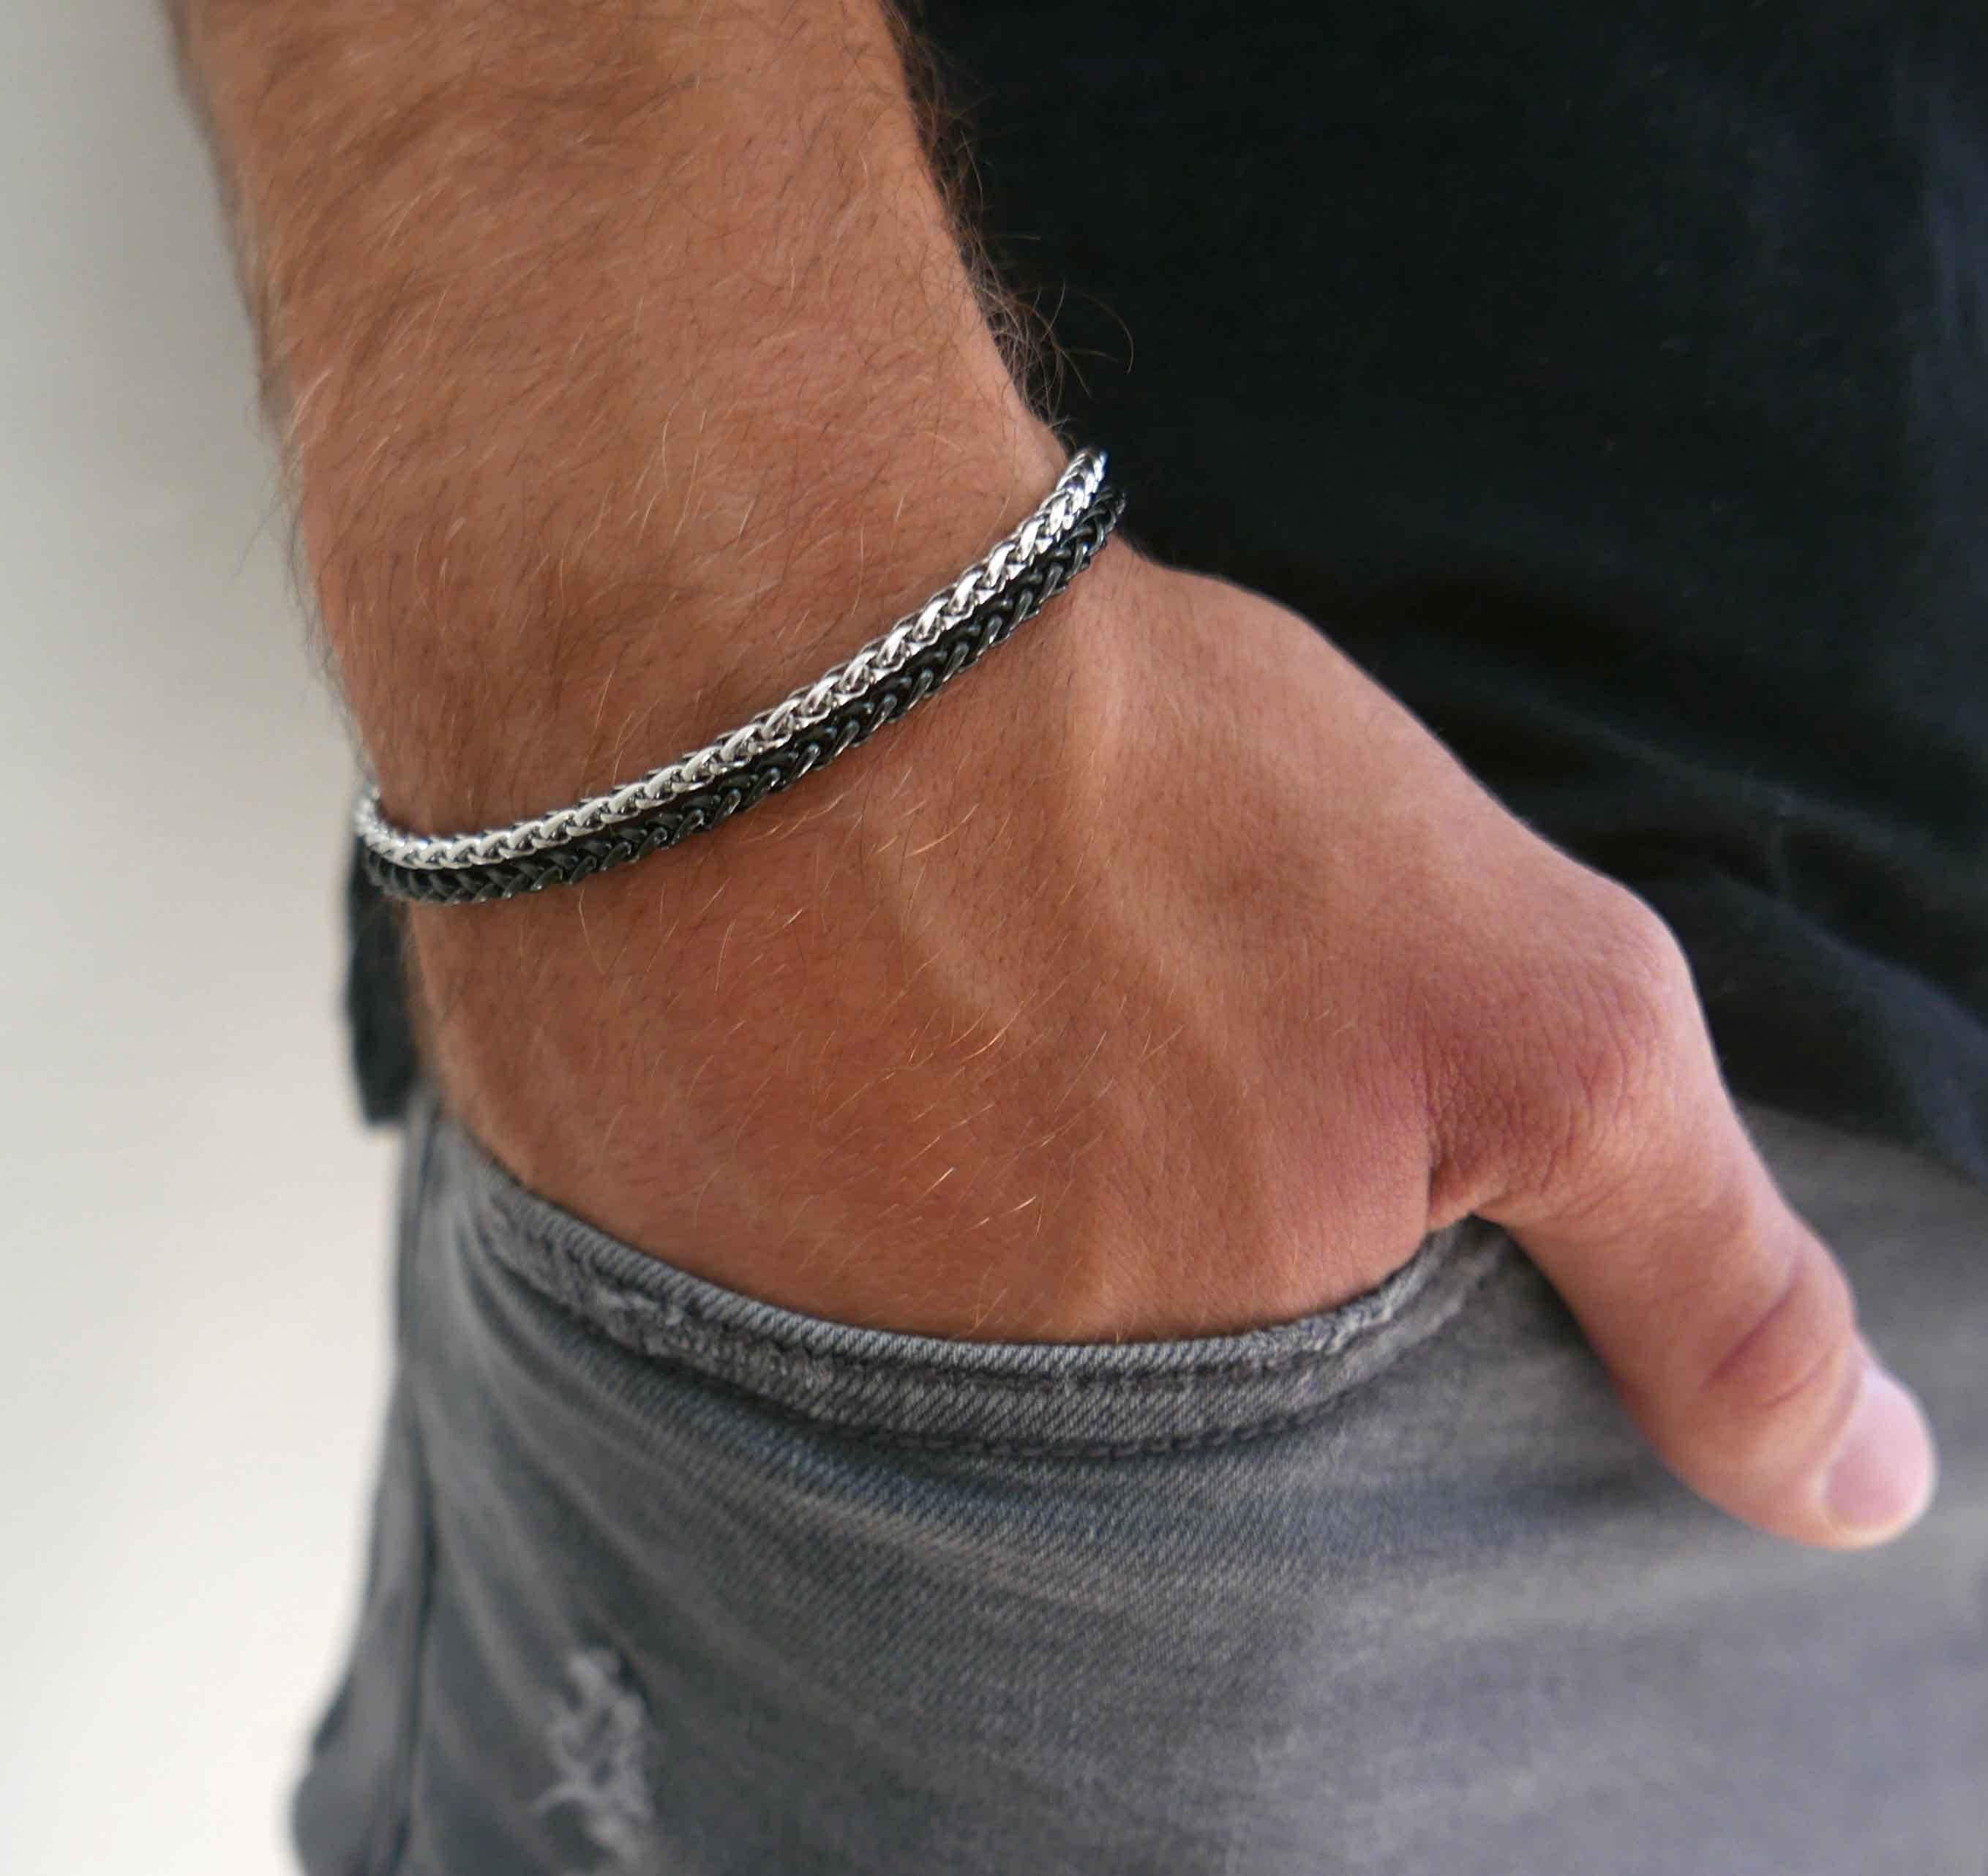 LIVEYOUNG Y129 Male Bracelets Exquisite Boy Chain Universal Stainless Steel Men  Bracelet silver